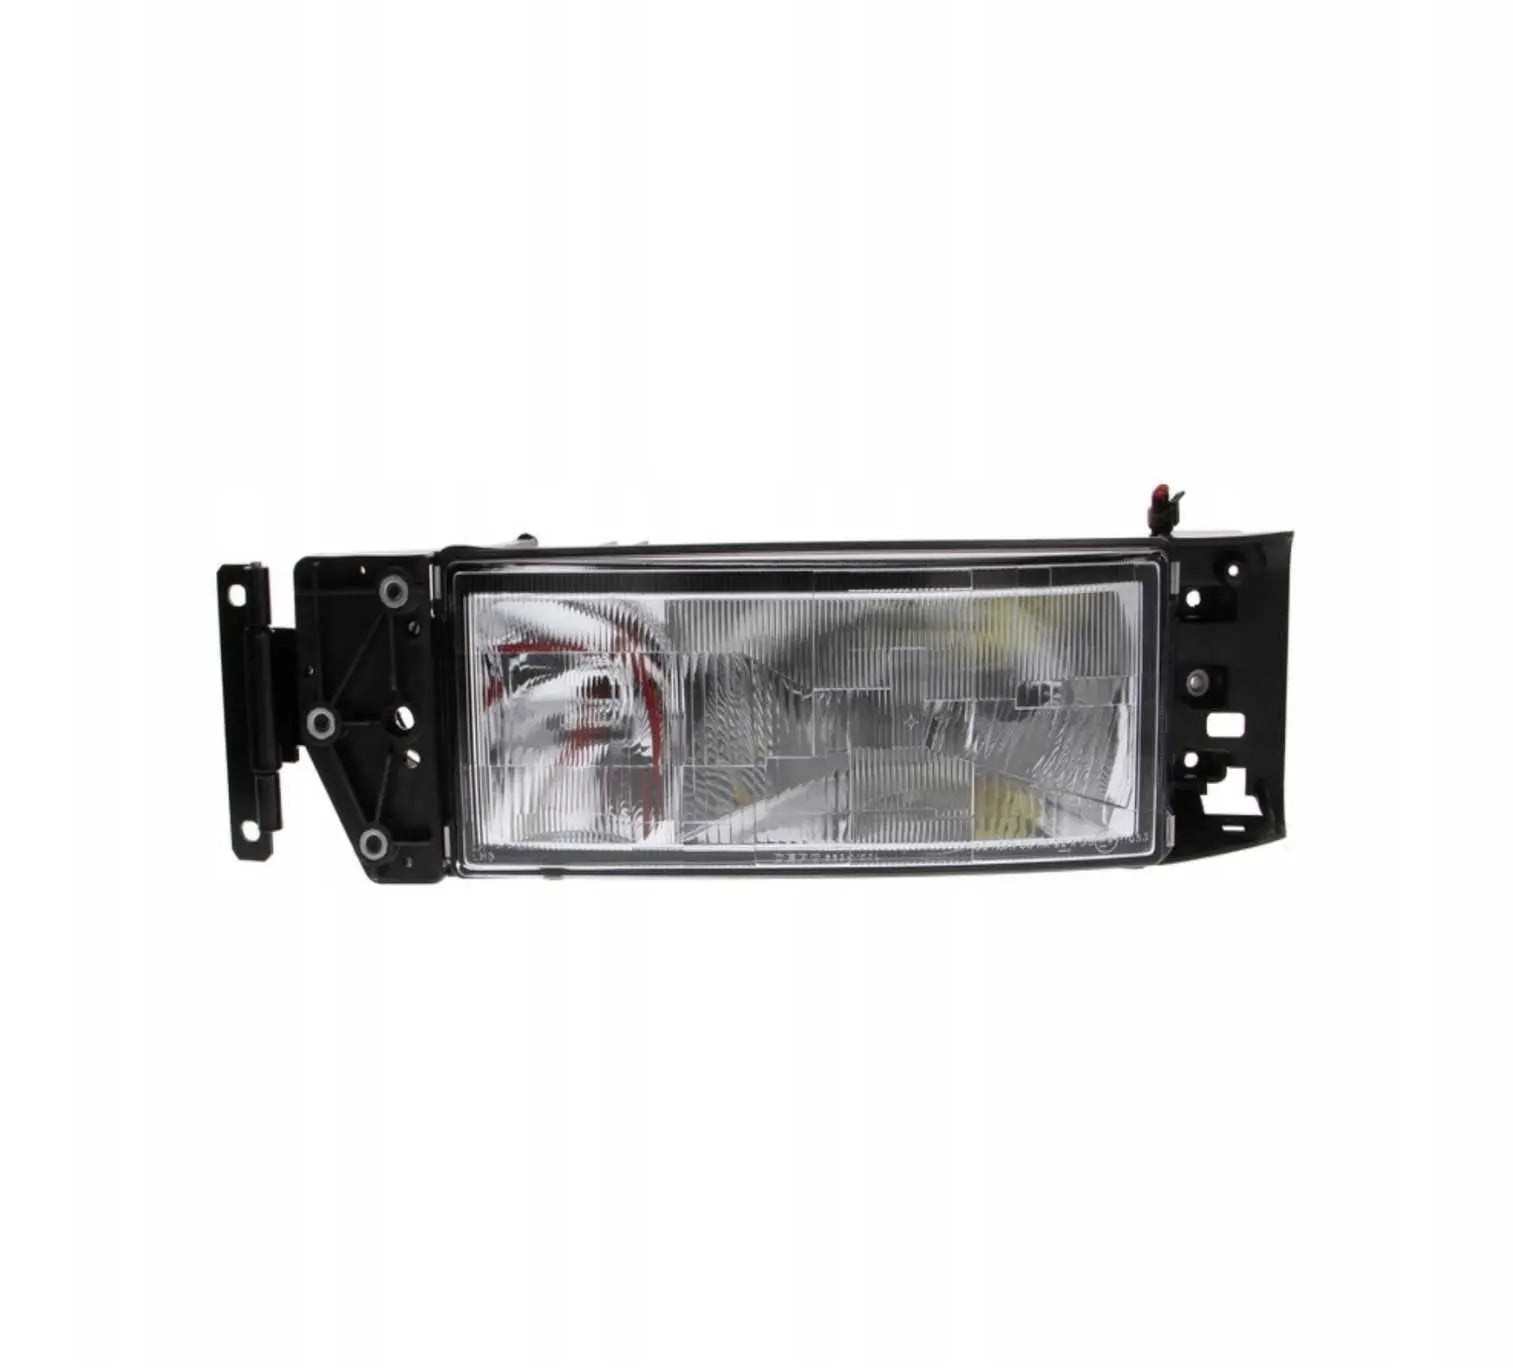 FANCHANTS 4861794 4861335 98449174 98467196 HEAD LAMP Manual, LHD, With E Mark, Without Bulb, Left FOR IVECO Eurostar Eurotech TRUCK FANCHANTS Aftermarket Auto Parts